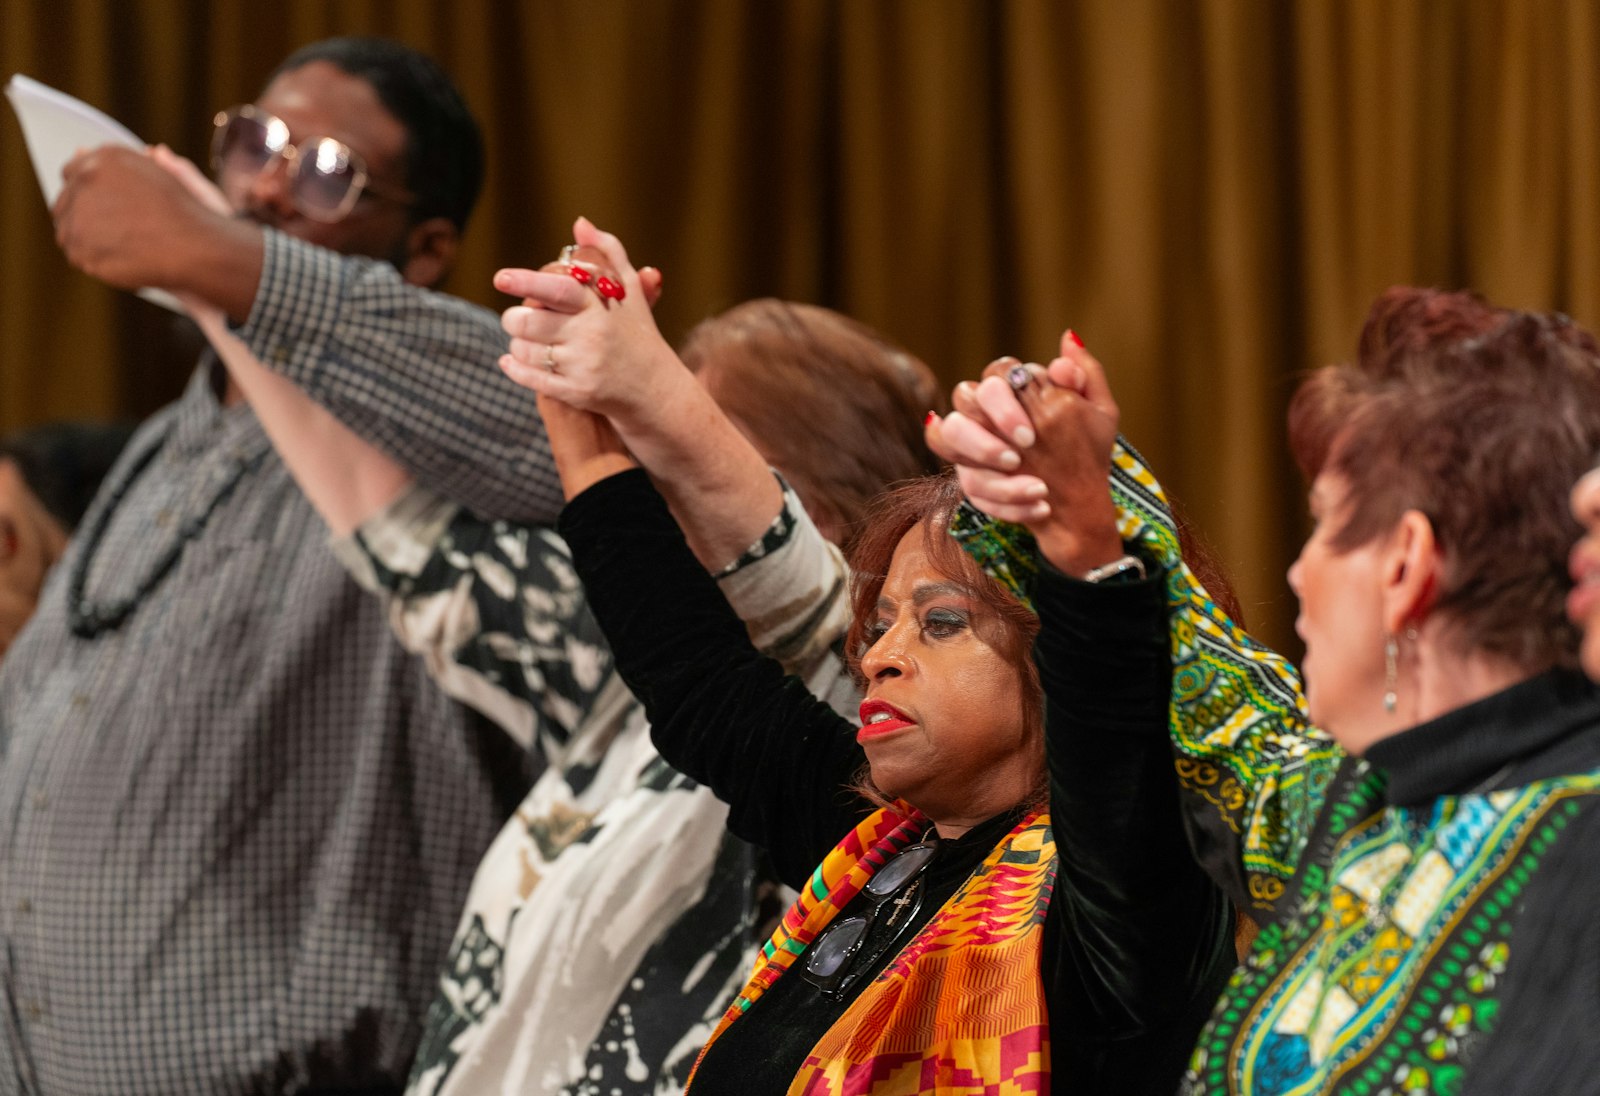 Choir members lift their hands in praise during the Mass for Justice and Peace. About 150 people, including members of the Knights and Ladies of Peter Claver, took part in the annual celebration.